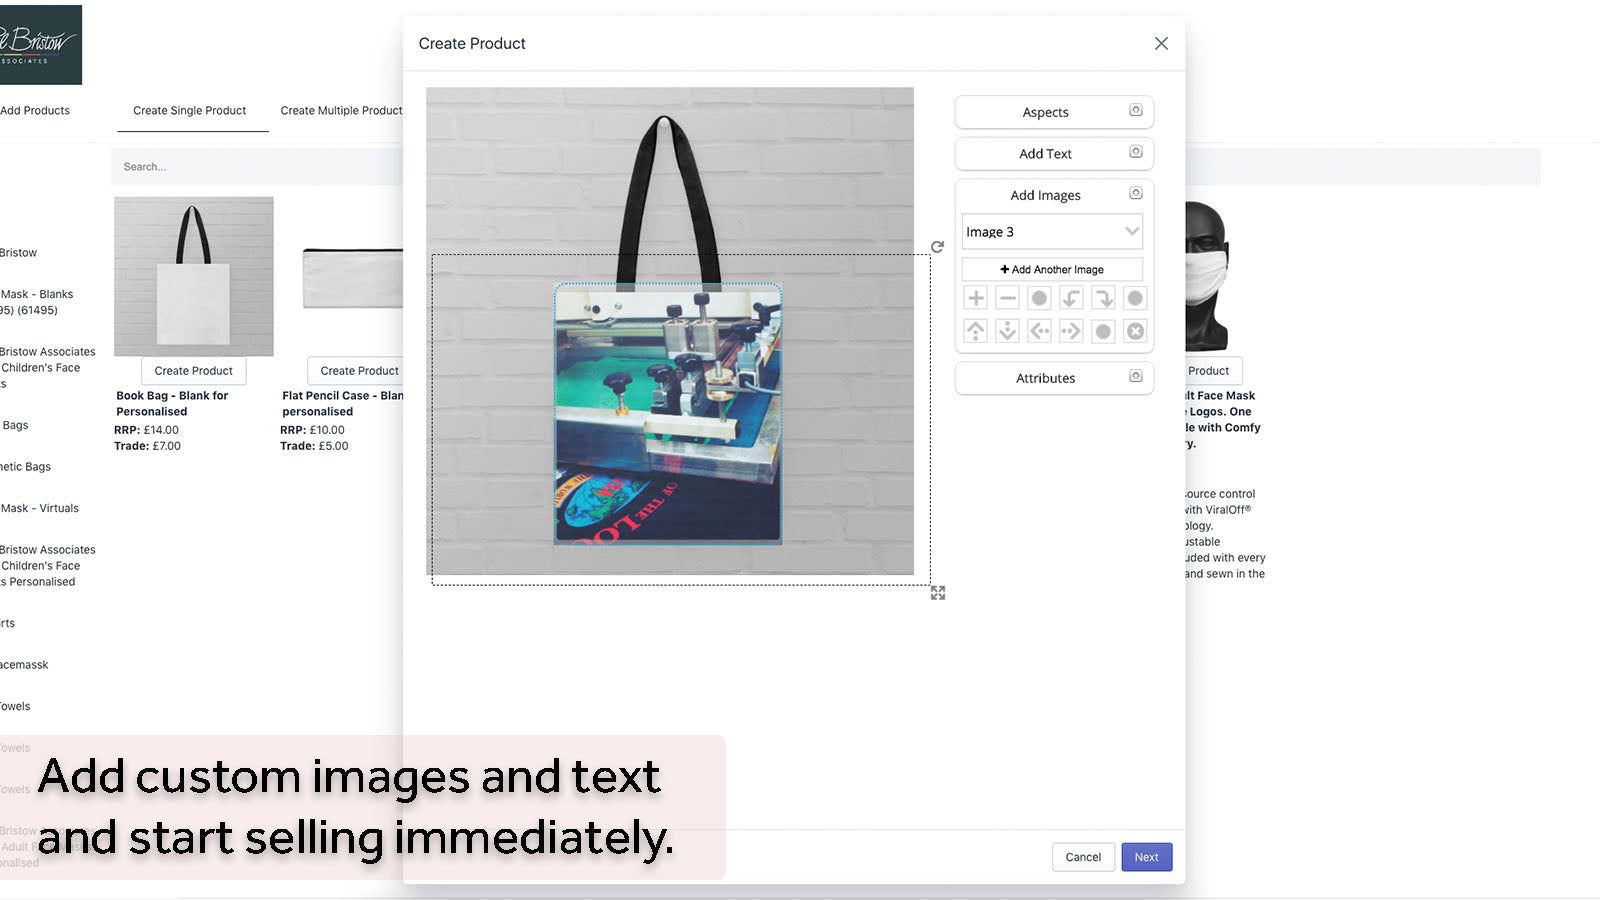 Add custom images and text and start selling immediately.